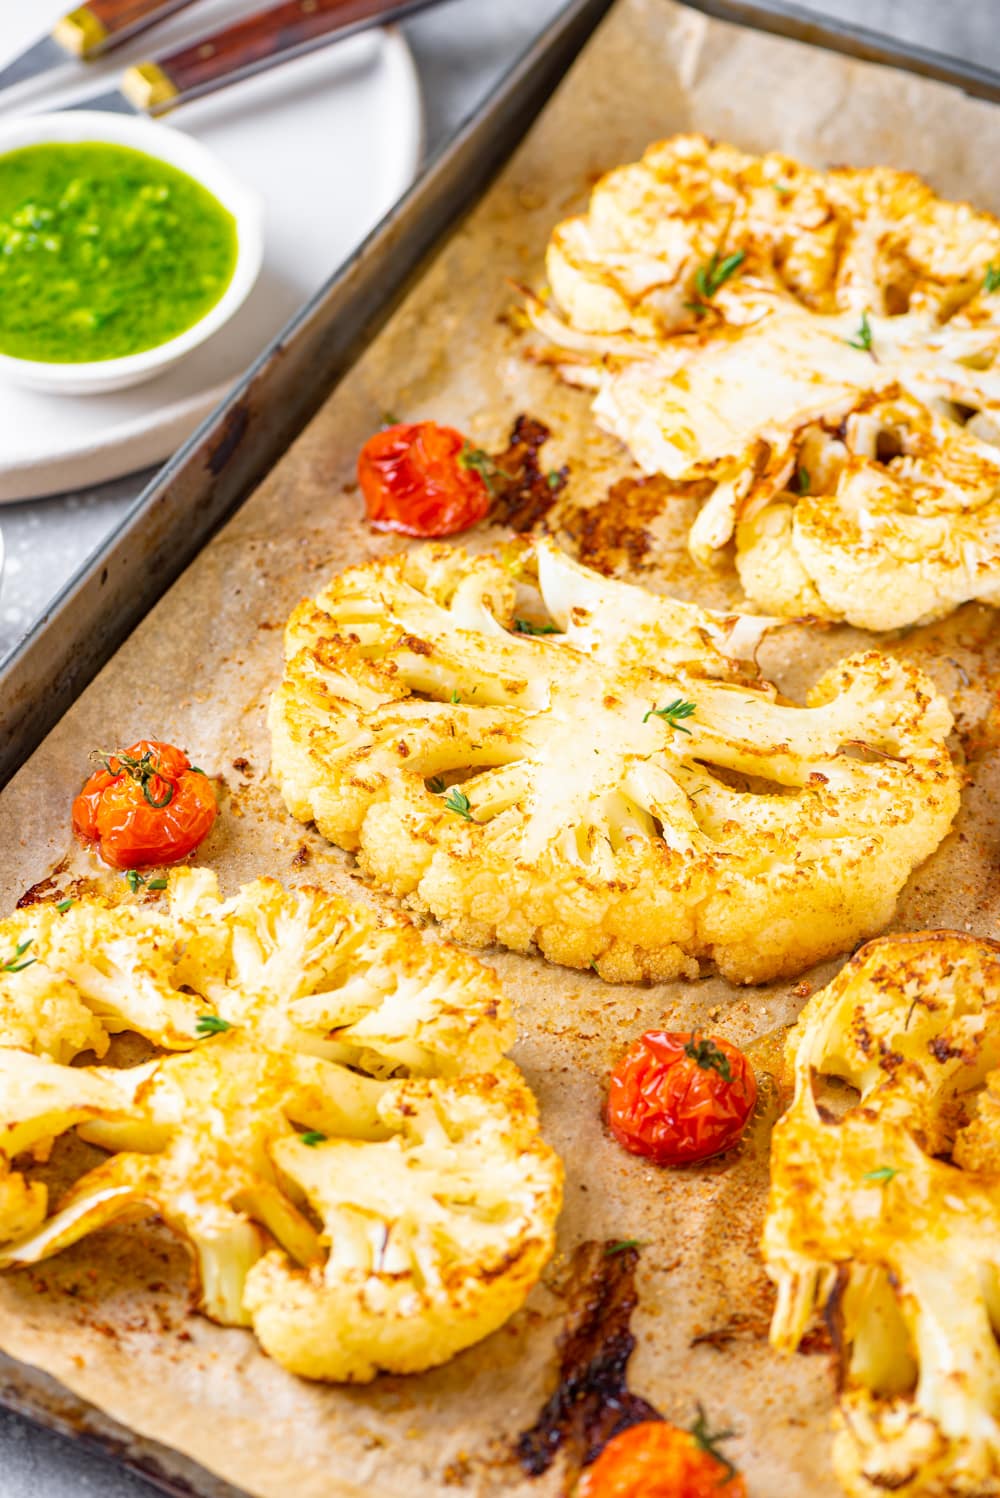 A close up view of three cauliflower steaks lined up on a baking sheet lined with parchment paper. There is three cherry tomatoes on the baking sheet around the cauliflower. Behind the baking sheet to the left isa white plate with a small white bowl of cilantro sauce on it.